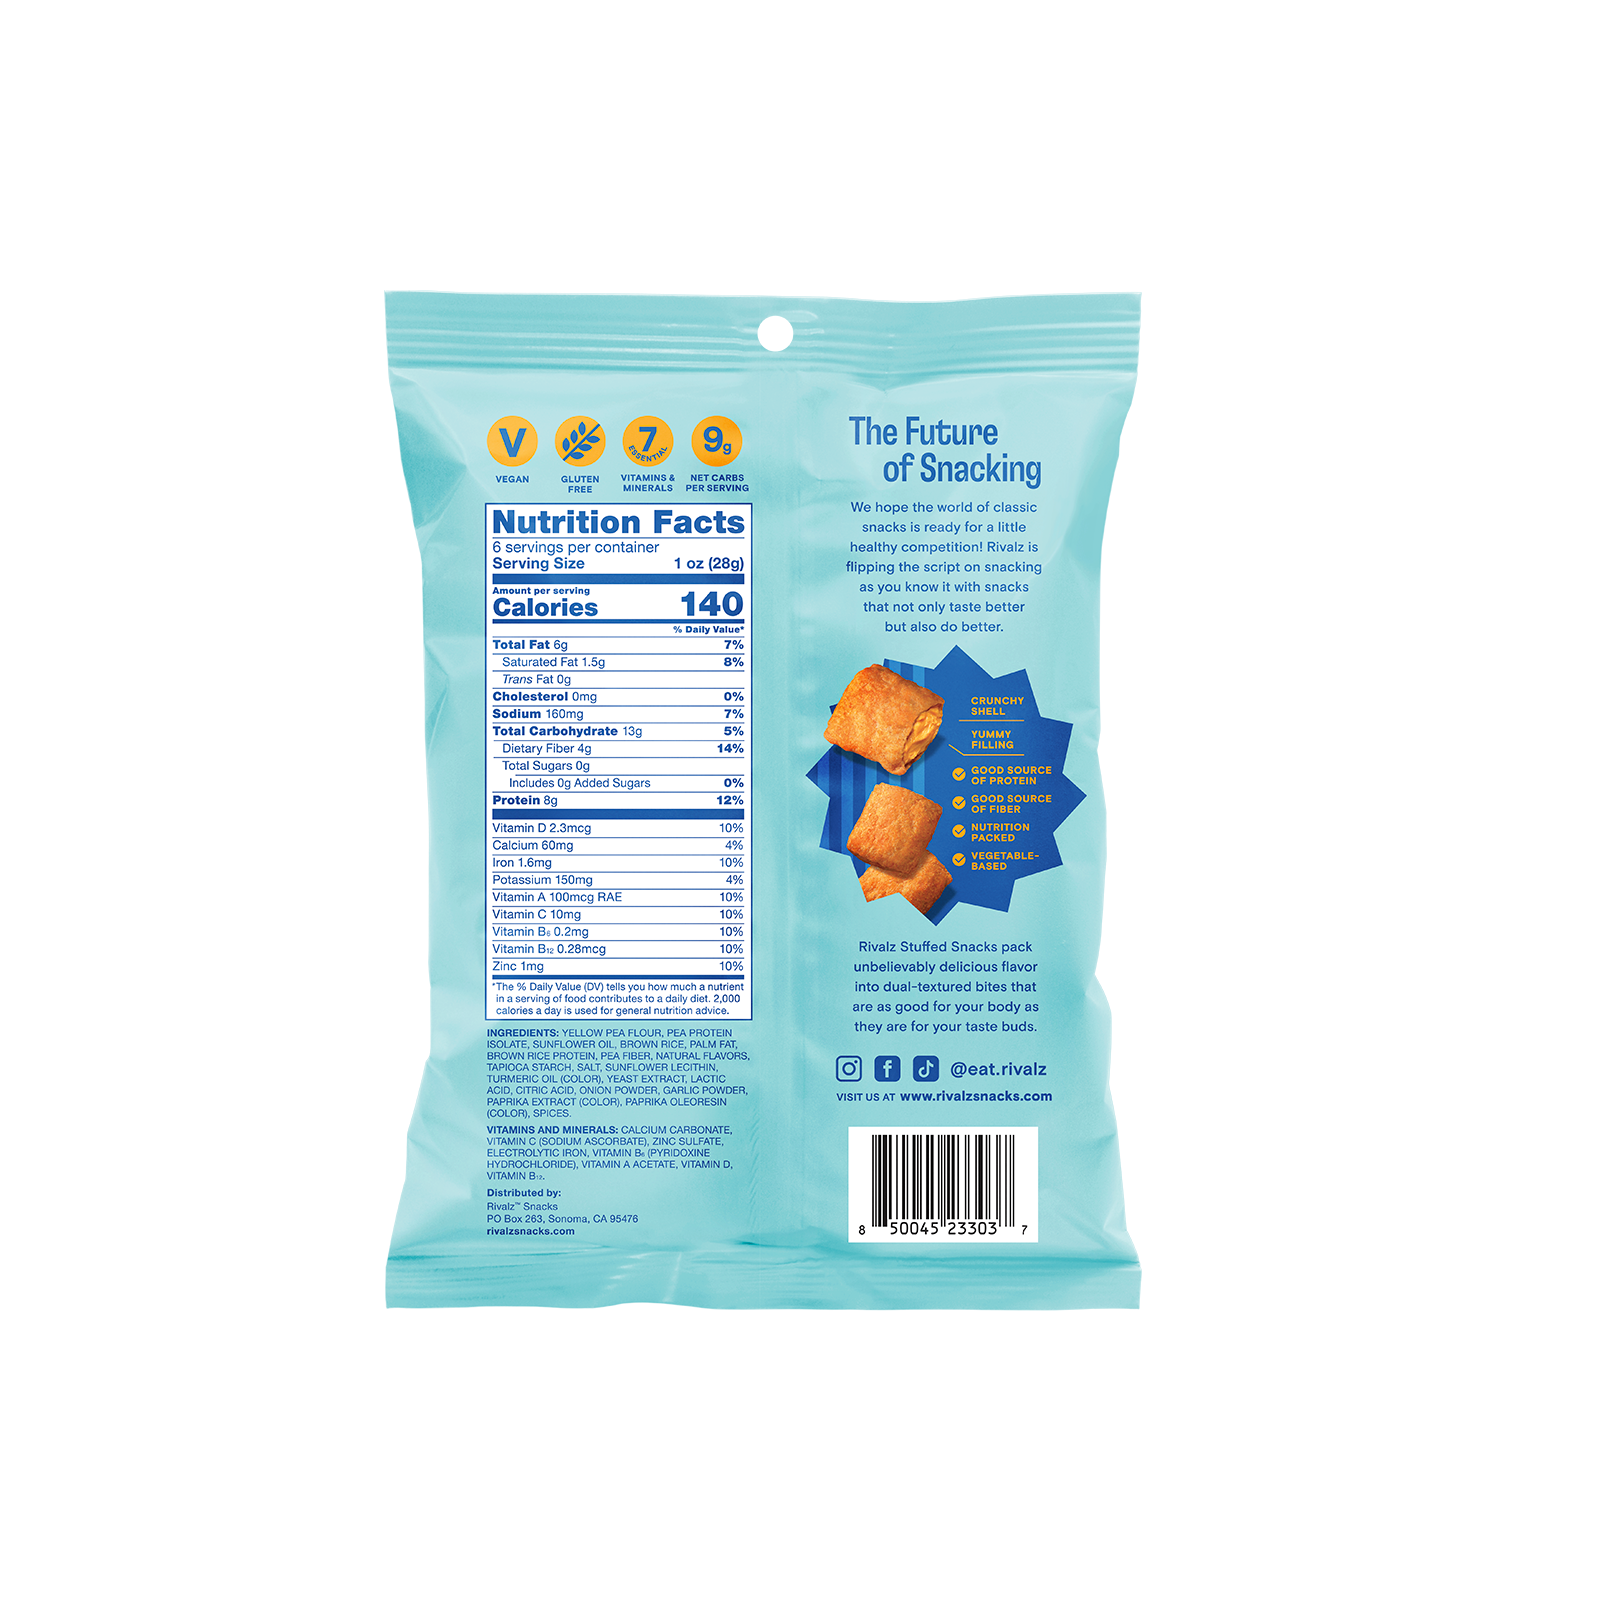 Back of a bag of Rivalz Snacks Extra Chedda Mac plant based and gluten free snacks